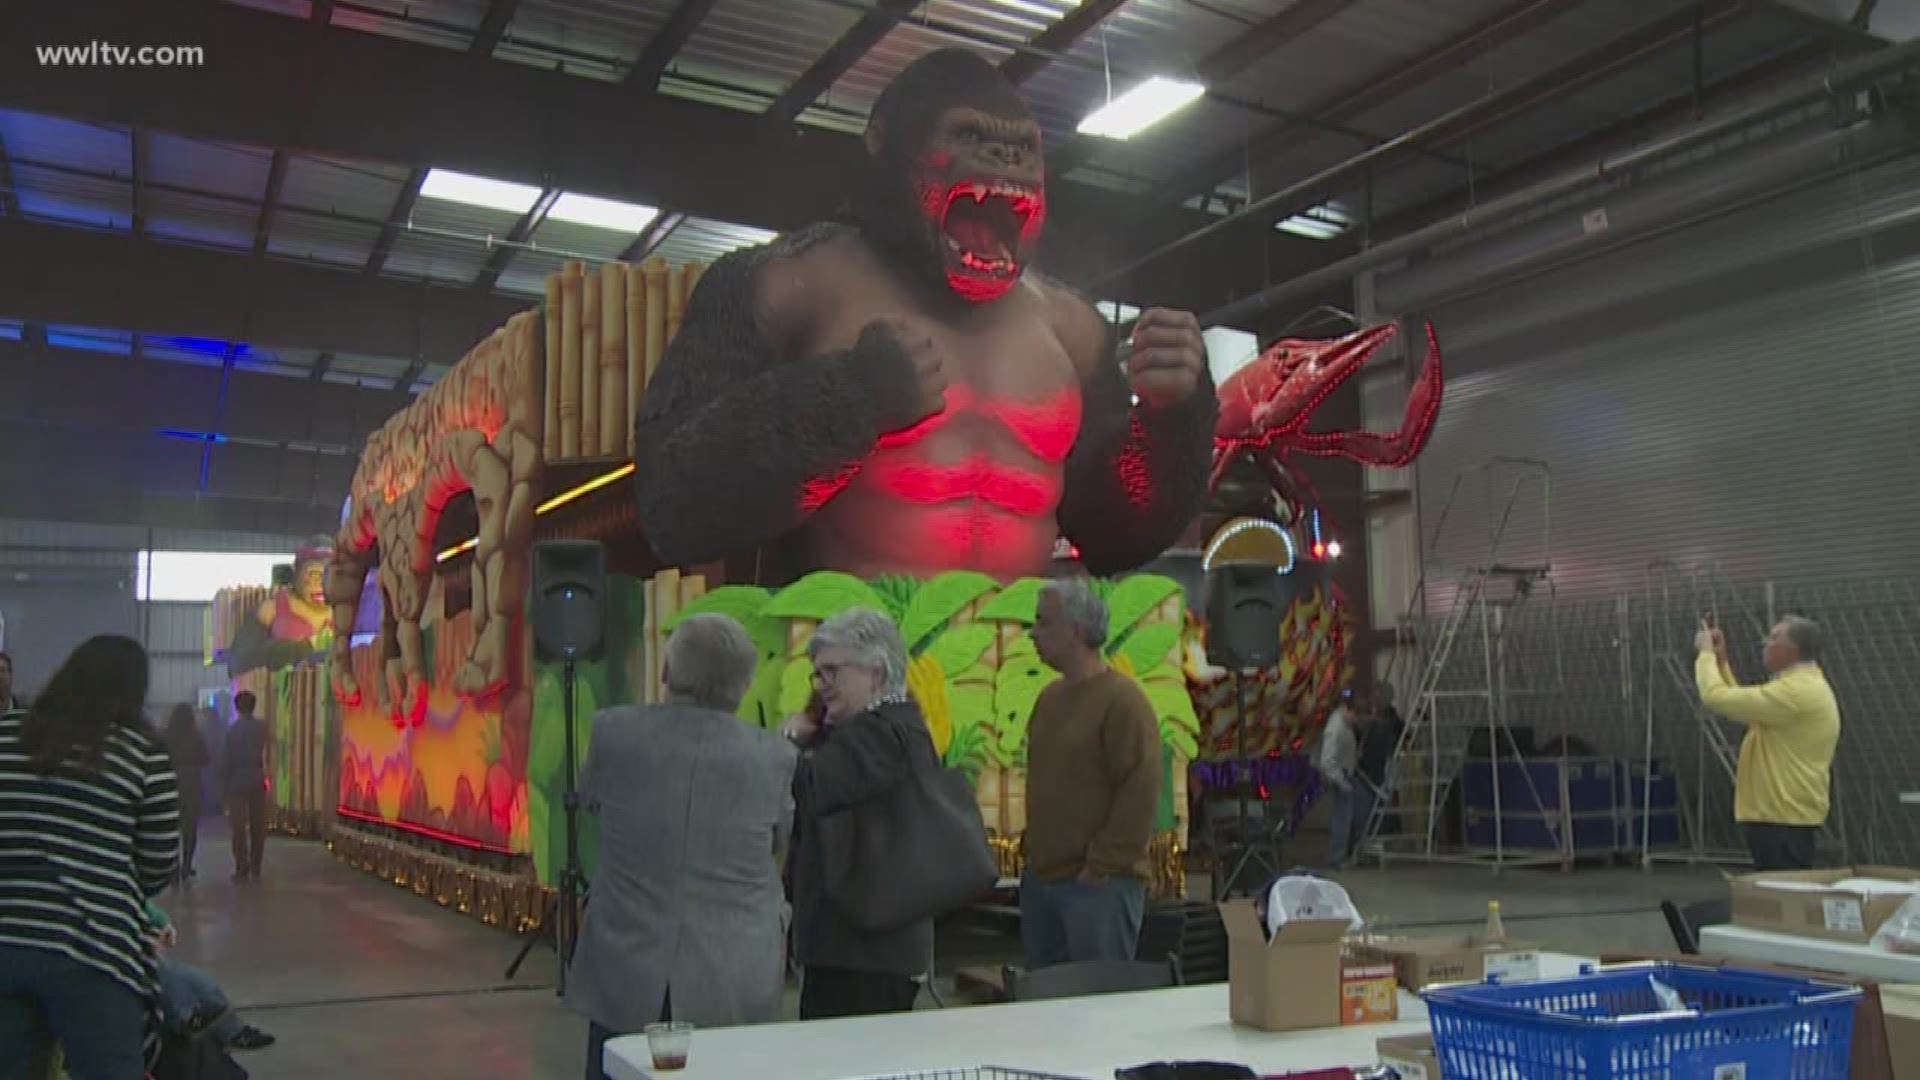 The Krewe of Bacchus open house on Sunday offered a preview of floats for its 50th anniversary parade.